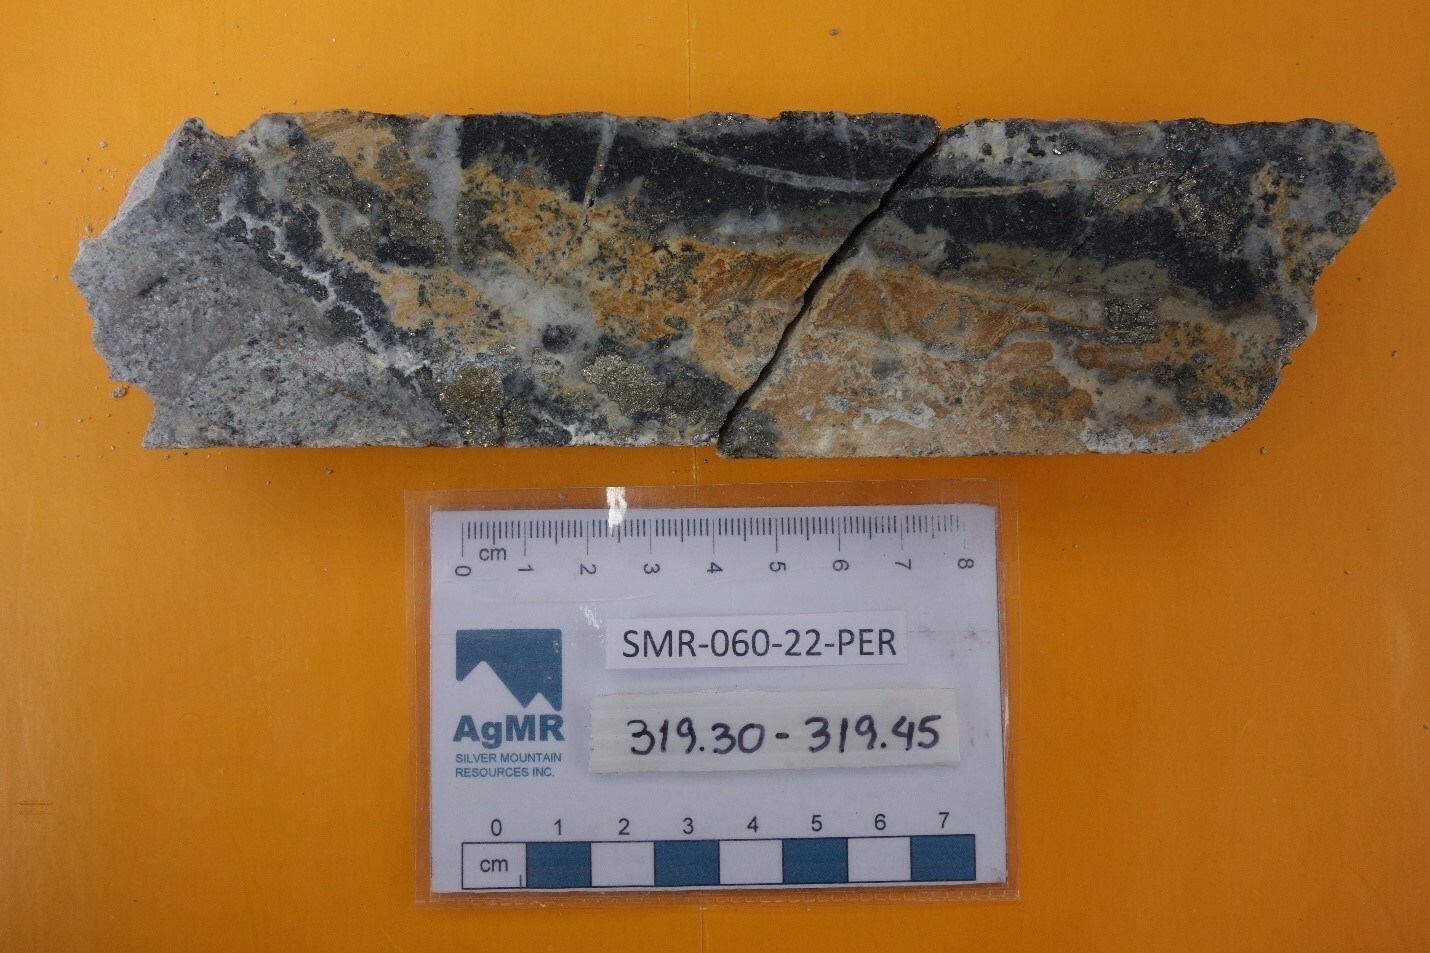 Fig.2: Photo of mineralized interval of drill core, Perseguida vein, hole SMR-060-22-PER, 319.30 – 319.45 m depth. Vein interval is composed of several generations of grey and milky white quartz, with irregular pods and fine veinlets of silver sulpho-salts, galena, sphalerite, chalcopyrite and pyrite. Late rhodochrosite with interspersed brown iron oxides is also visible. (CNW Group/Silver Mountain Resources Inc.)